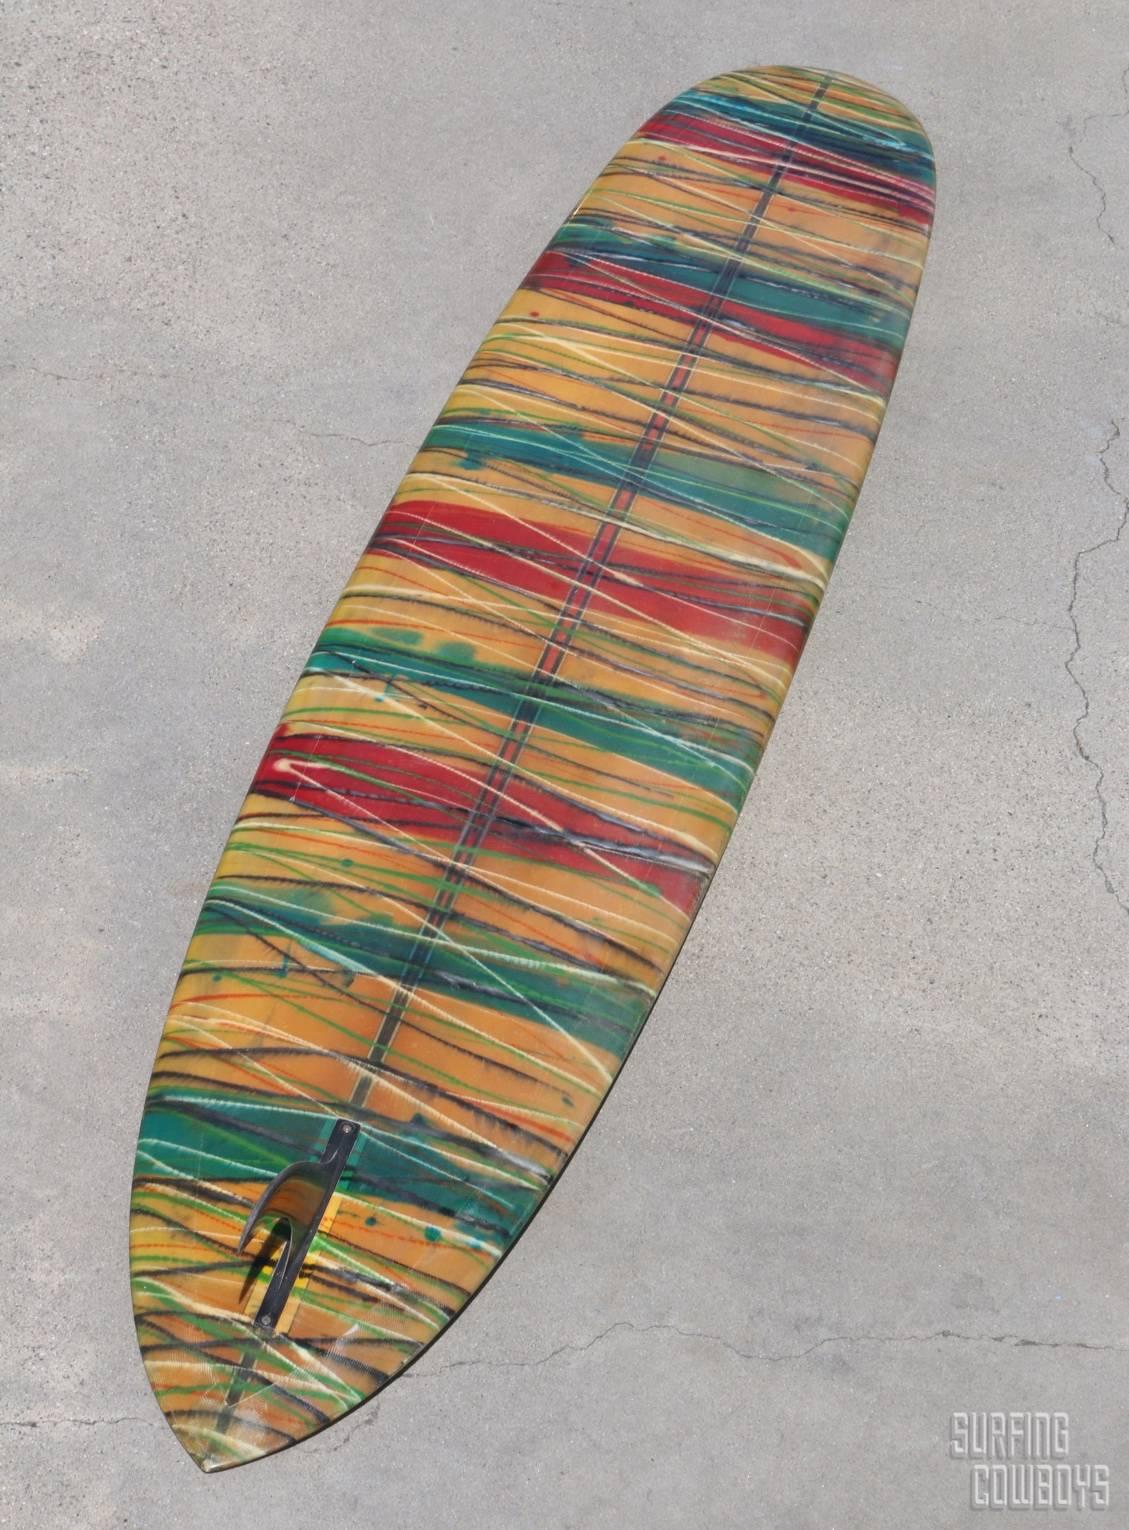 Late 1960s acid splashed Bing Pintail with clear deck, clear bright logo
and beautifully painted acid splash rails and bottom. Both deck and bottom are equally striking making this a perfect board to float centrally in a space, displaying with both